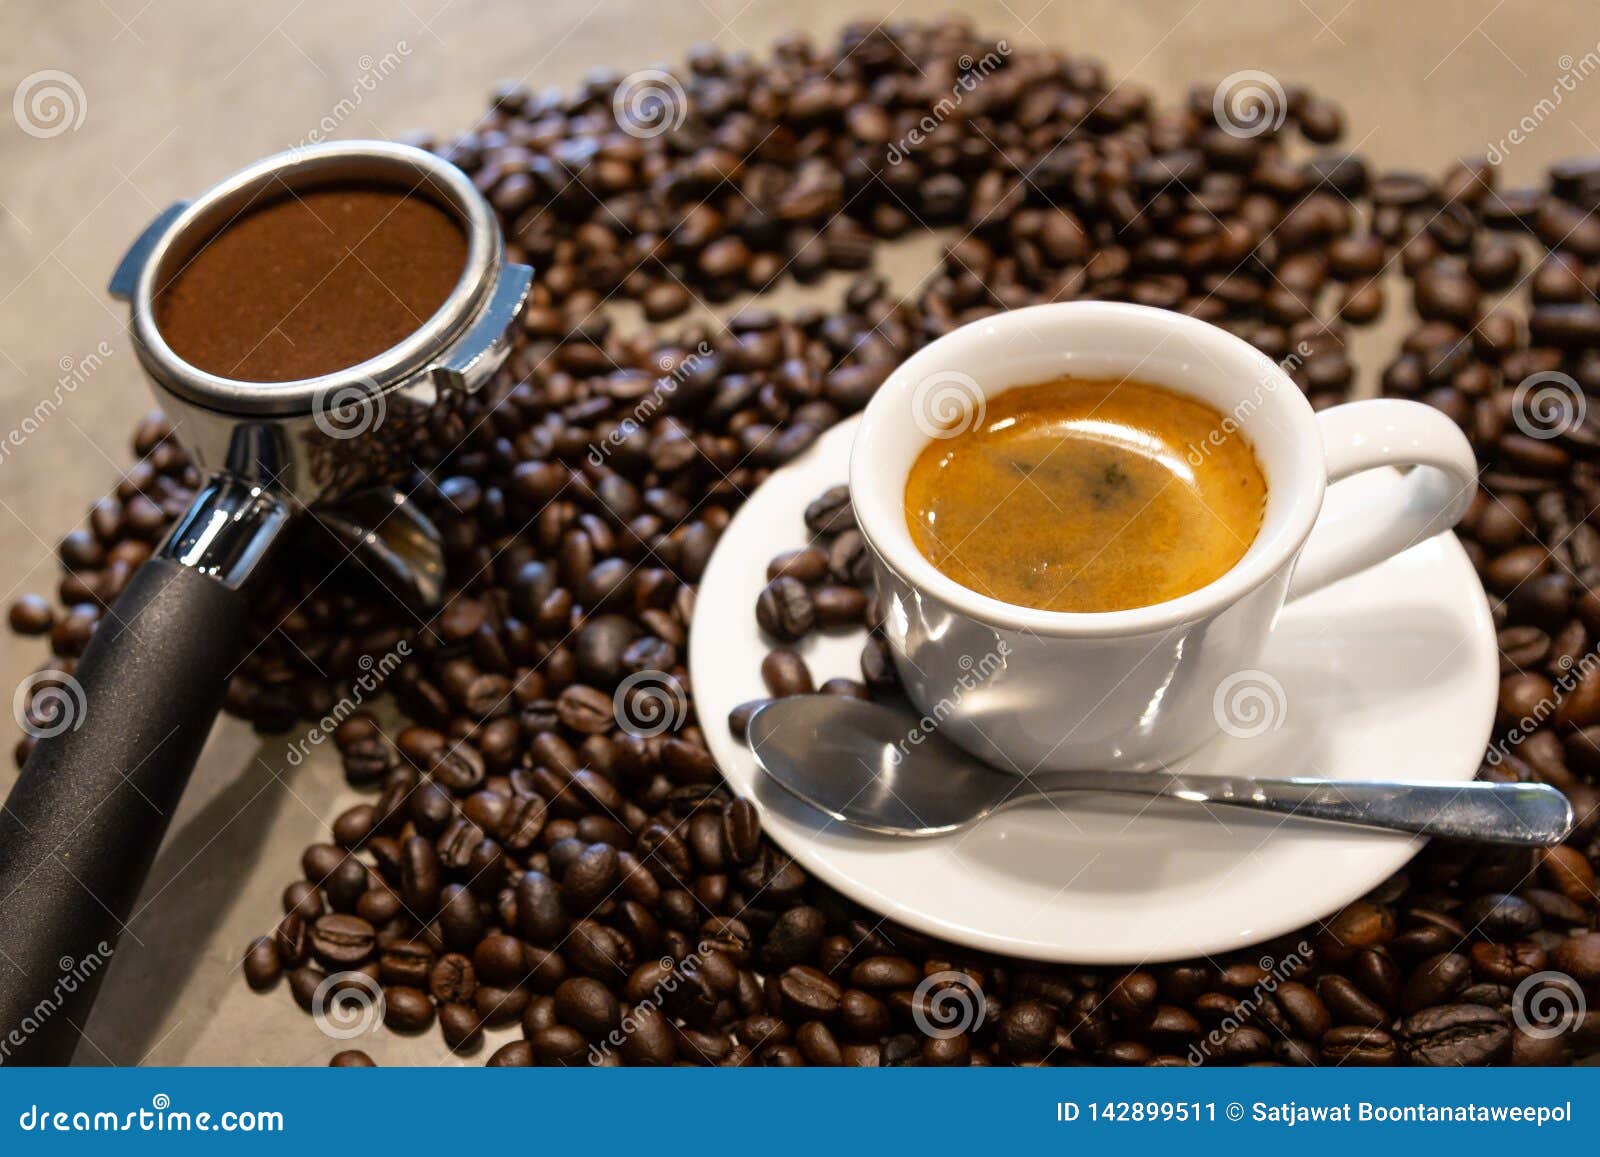 cup of espresso coffee and portafilter on coffee beans background ,fresh espresso with crema perfect shot in the morning at cafe